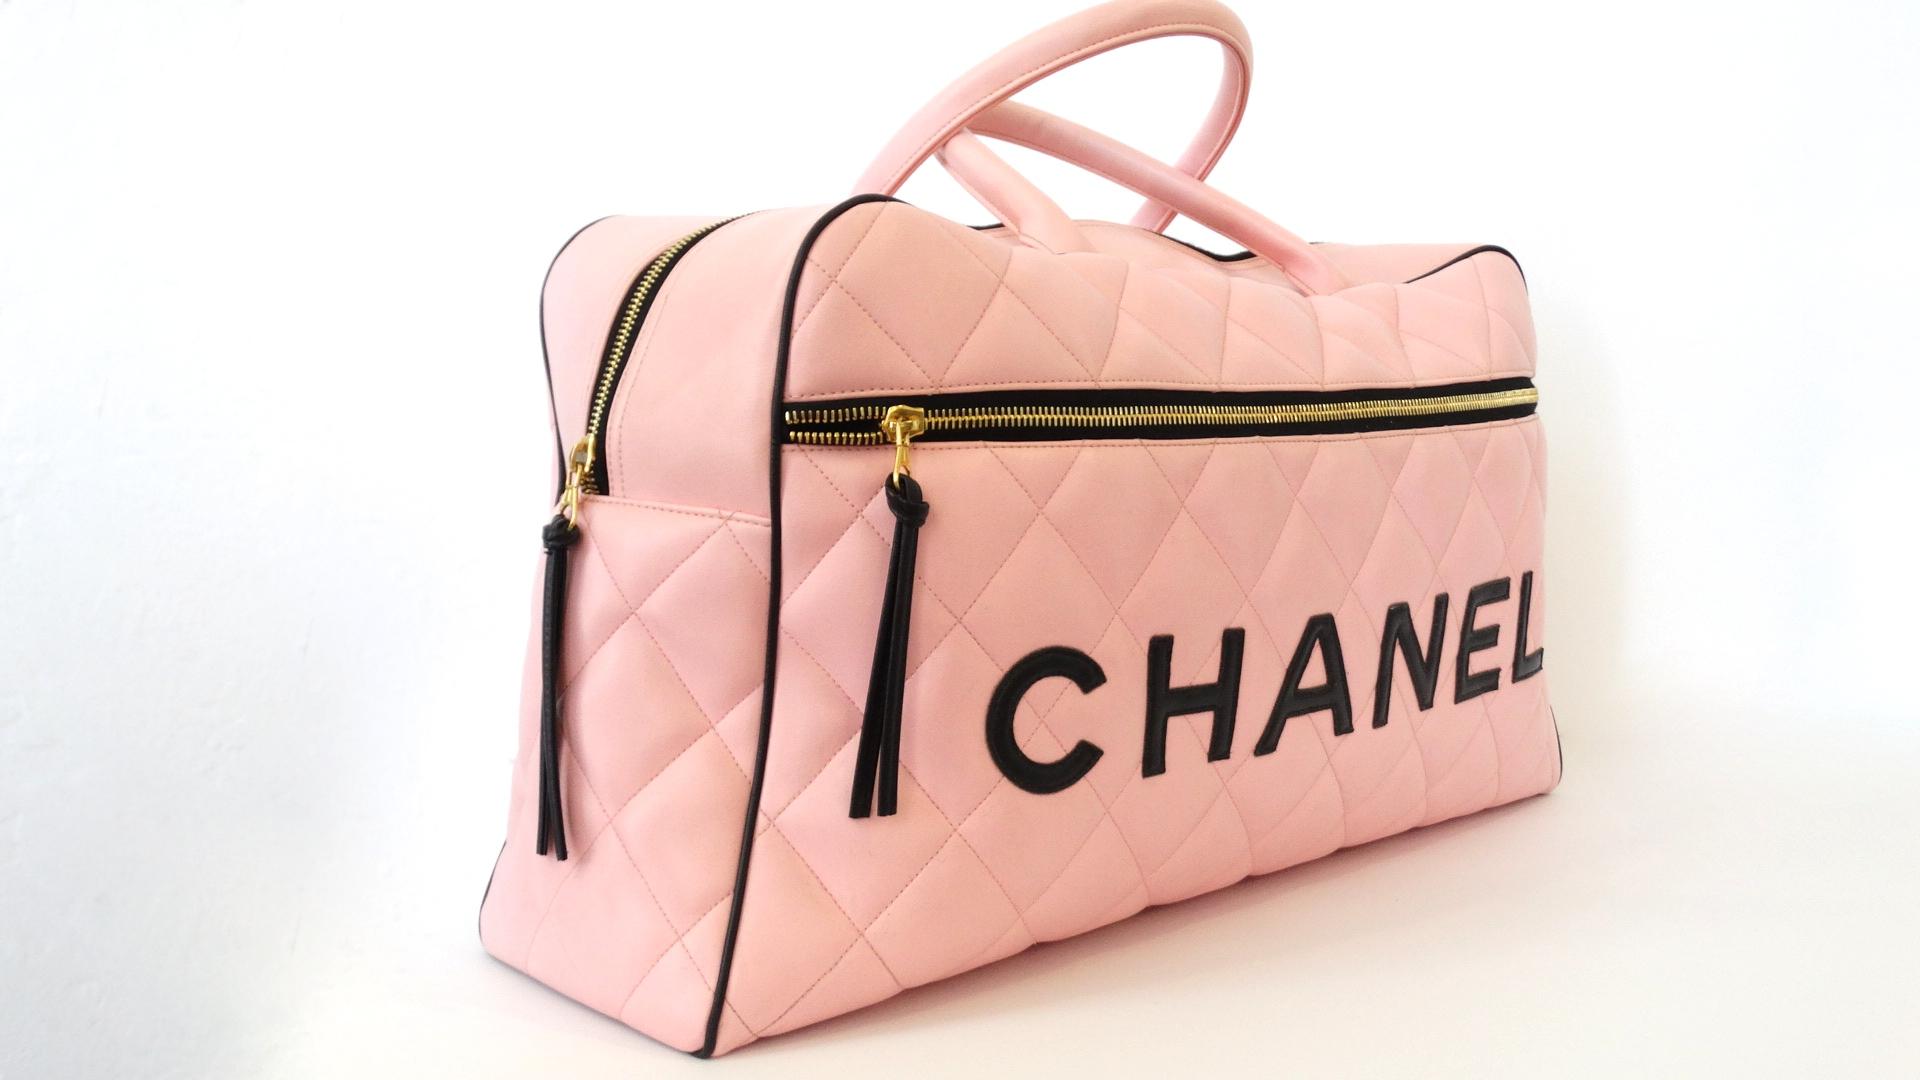 Channel your inner 1990s socialite with our adorable baby pink Chanel Boston duffle! Created circa 1994-1996, a bonafide piece of Lagerfeld's design legacy at this iconic fashion house. Made of a soft pink lambskin leather and stitched with Chanel's